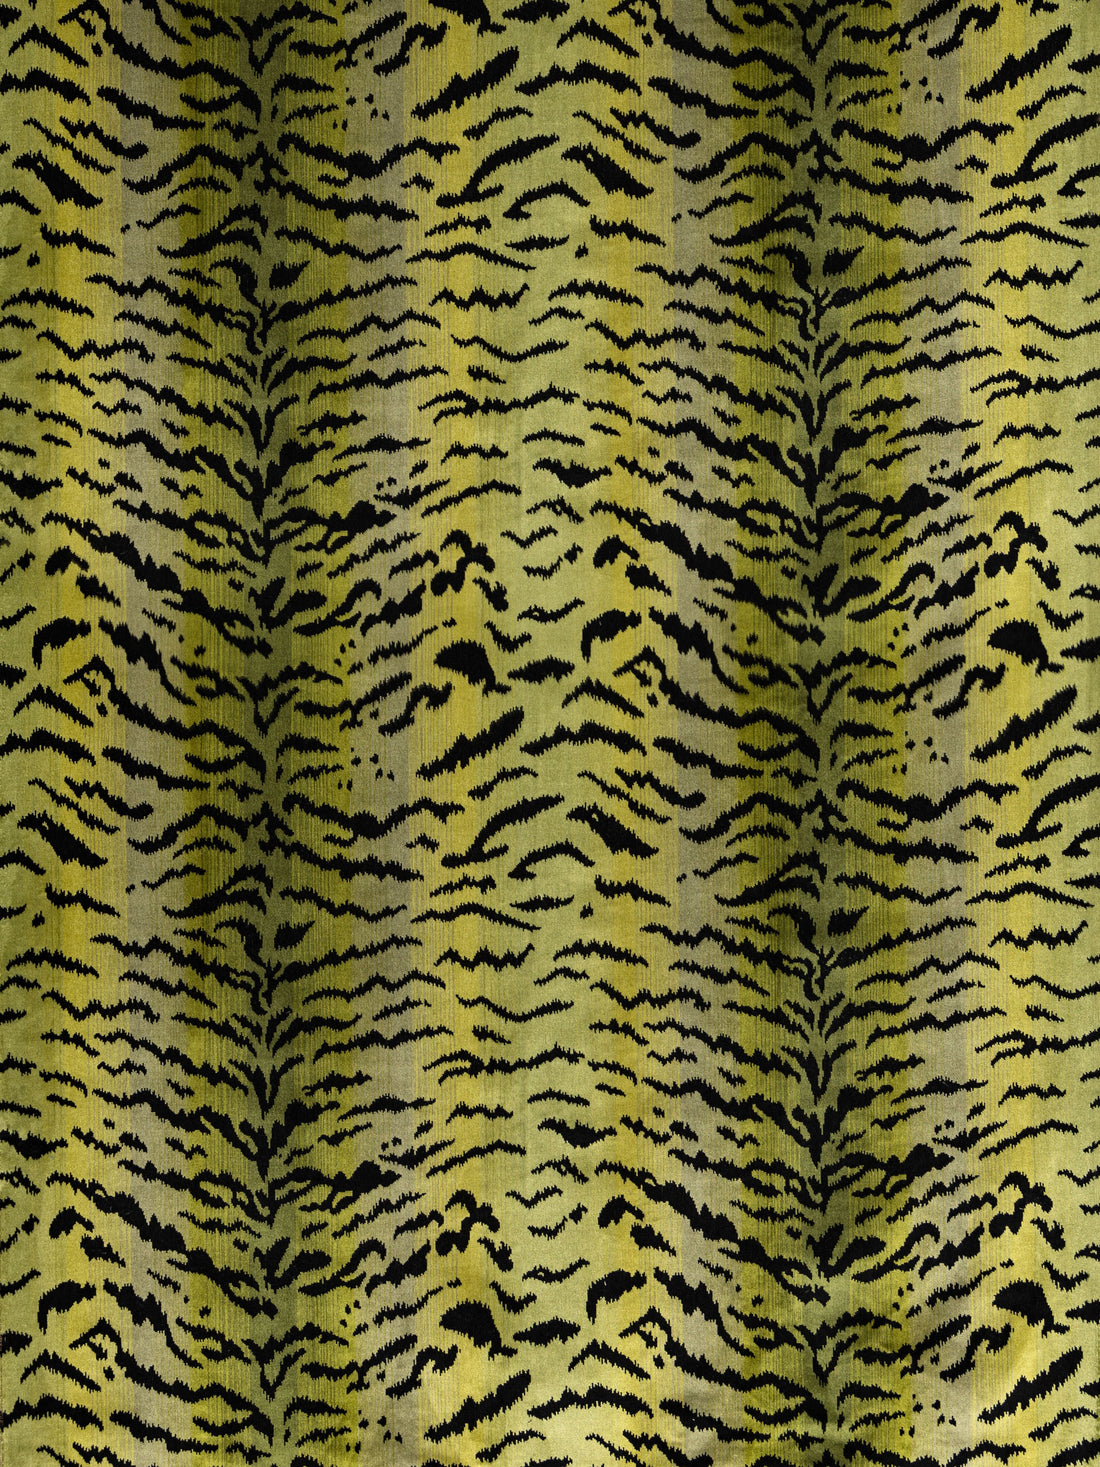 Tigre Silk fabric in greens and black color - pattern number SC 000226167MM - by Scalamandre in the Scalamandre Fabrics Book 1 collection